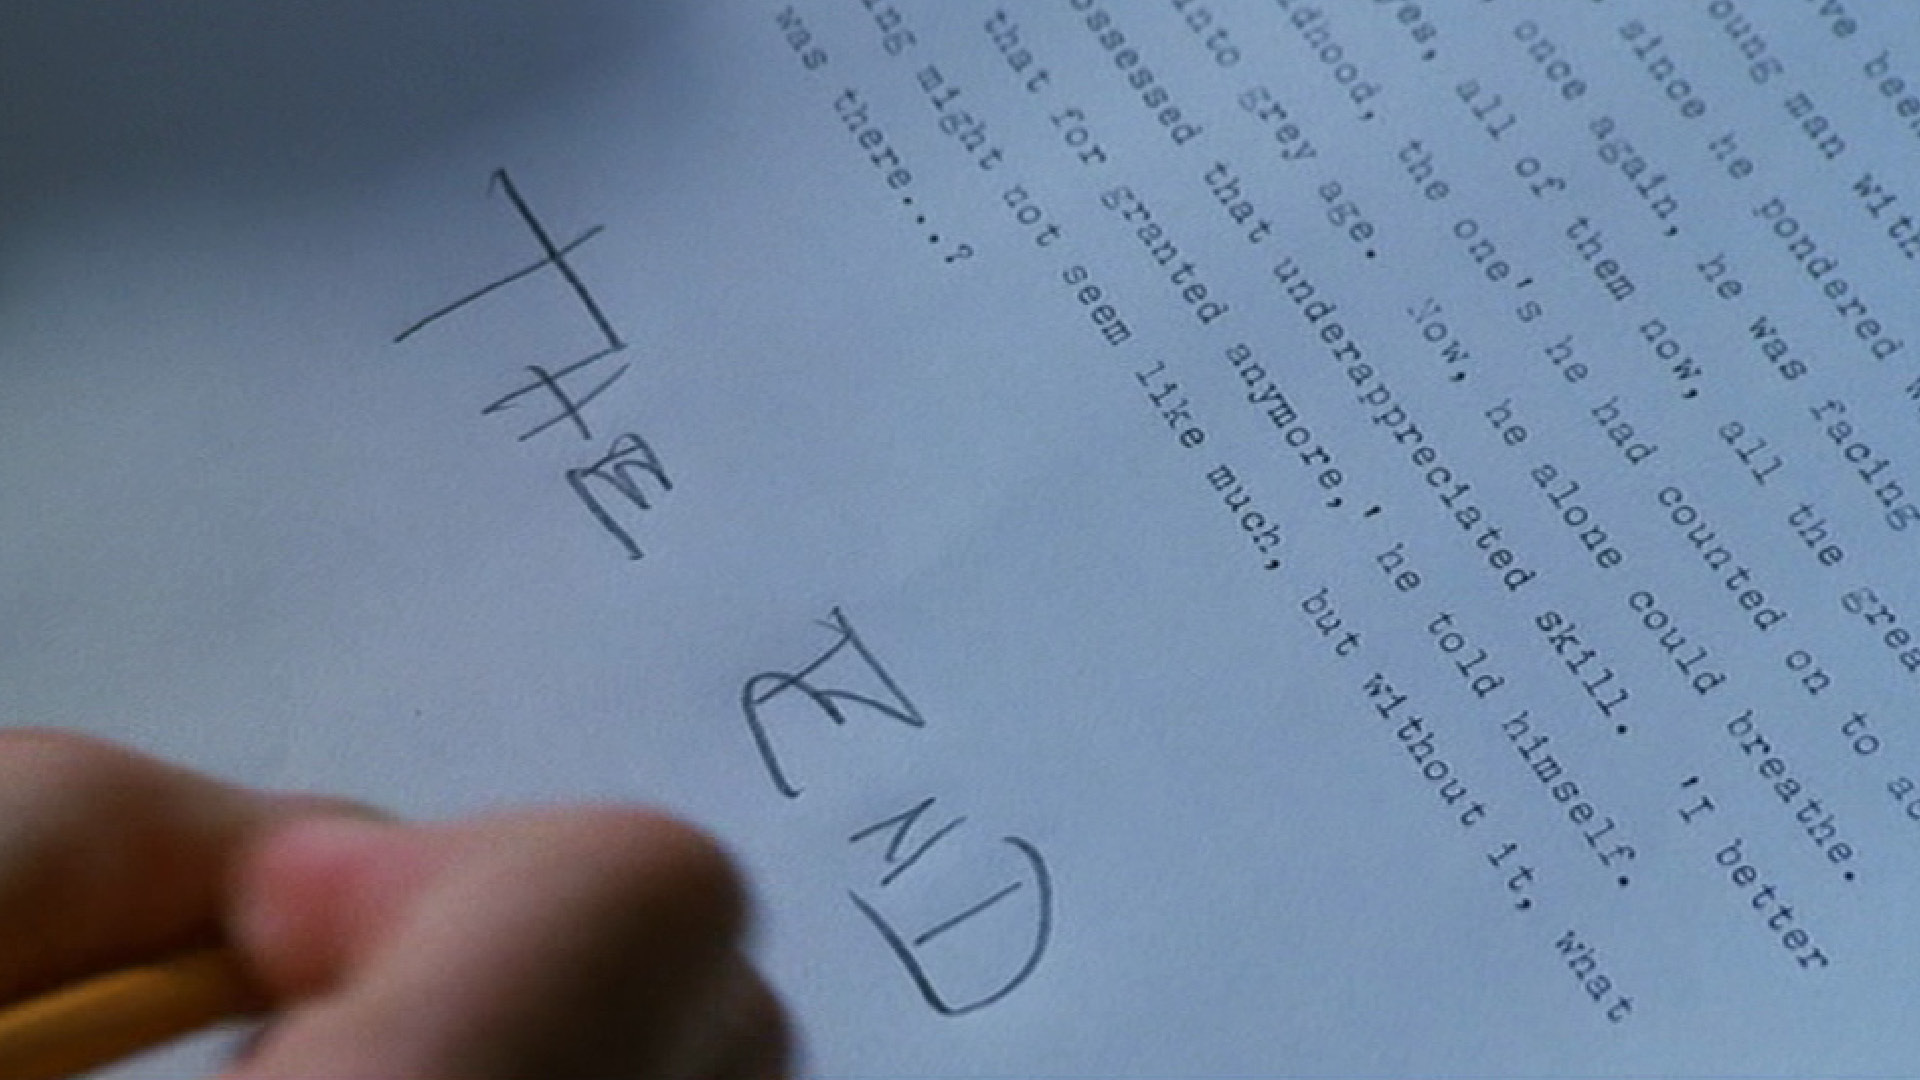 Misery Film Still - "The End" written on a piece of paper